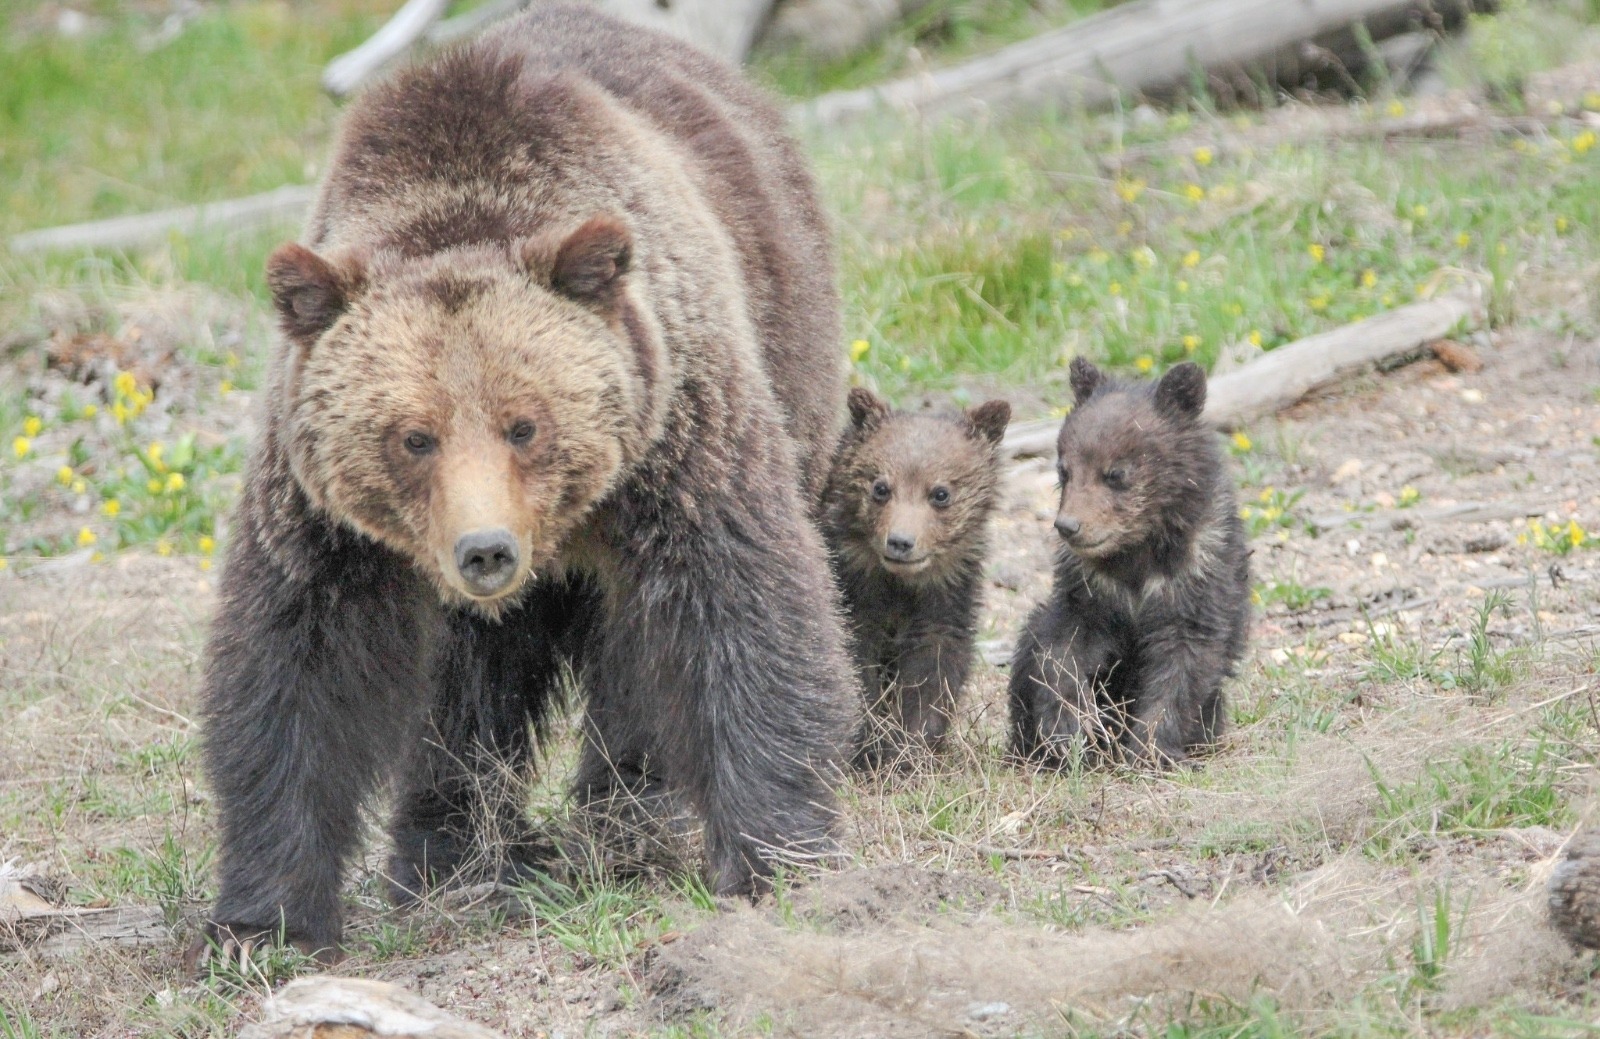 A mother grizzly and first-year cubs in Yellowstone, not unlike the adult bear killed in the Wind Rivers earlier in 2018 and her cubs orphaned and likely to die. Photo  courtesy NPS/Eric Johnston